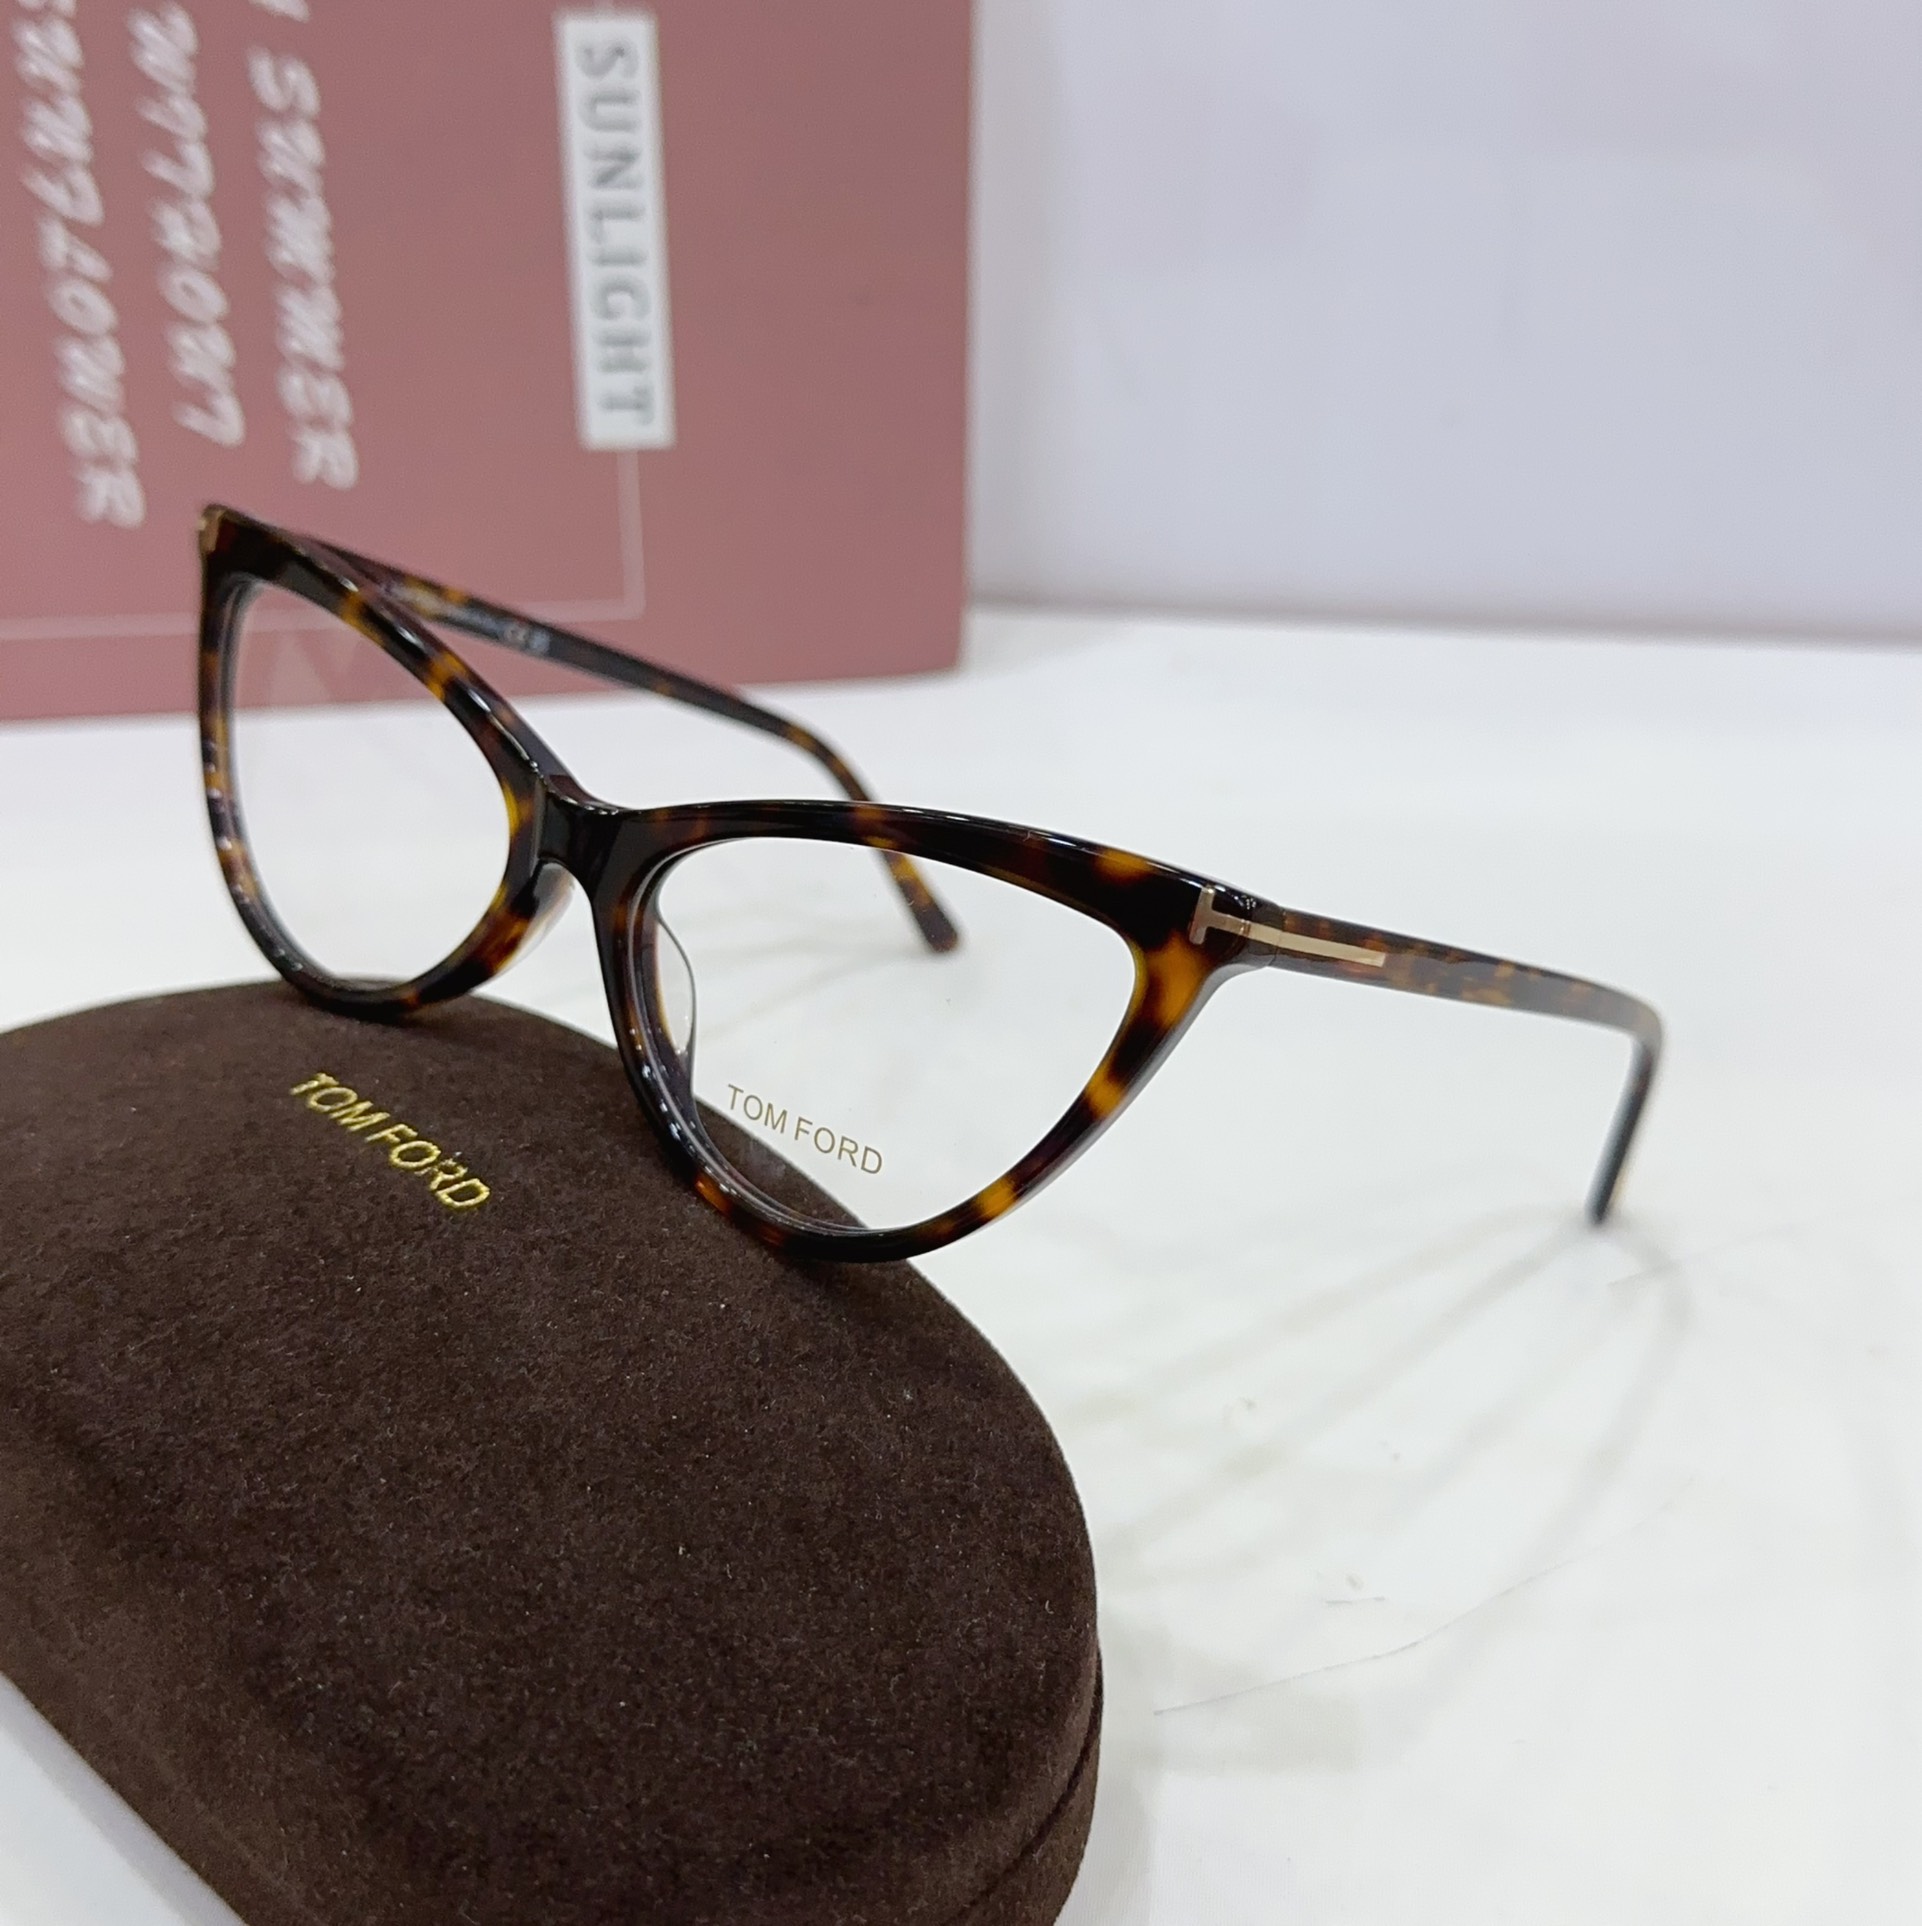 amber color of tomford glasses faux tf5896